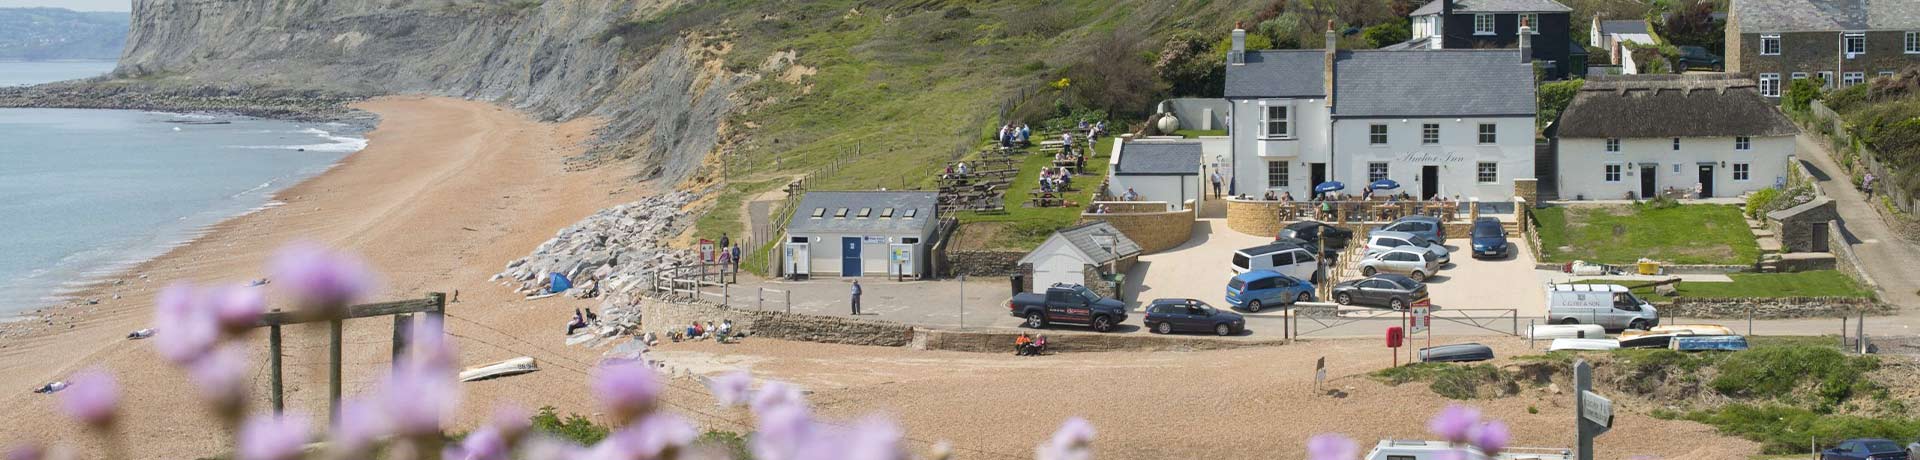 Restaurants and pubs with sea views in Dorset